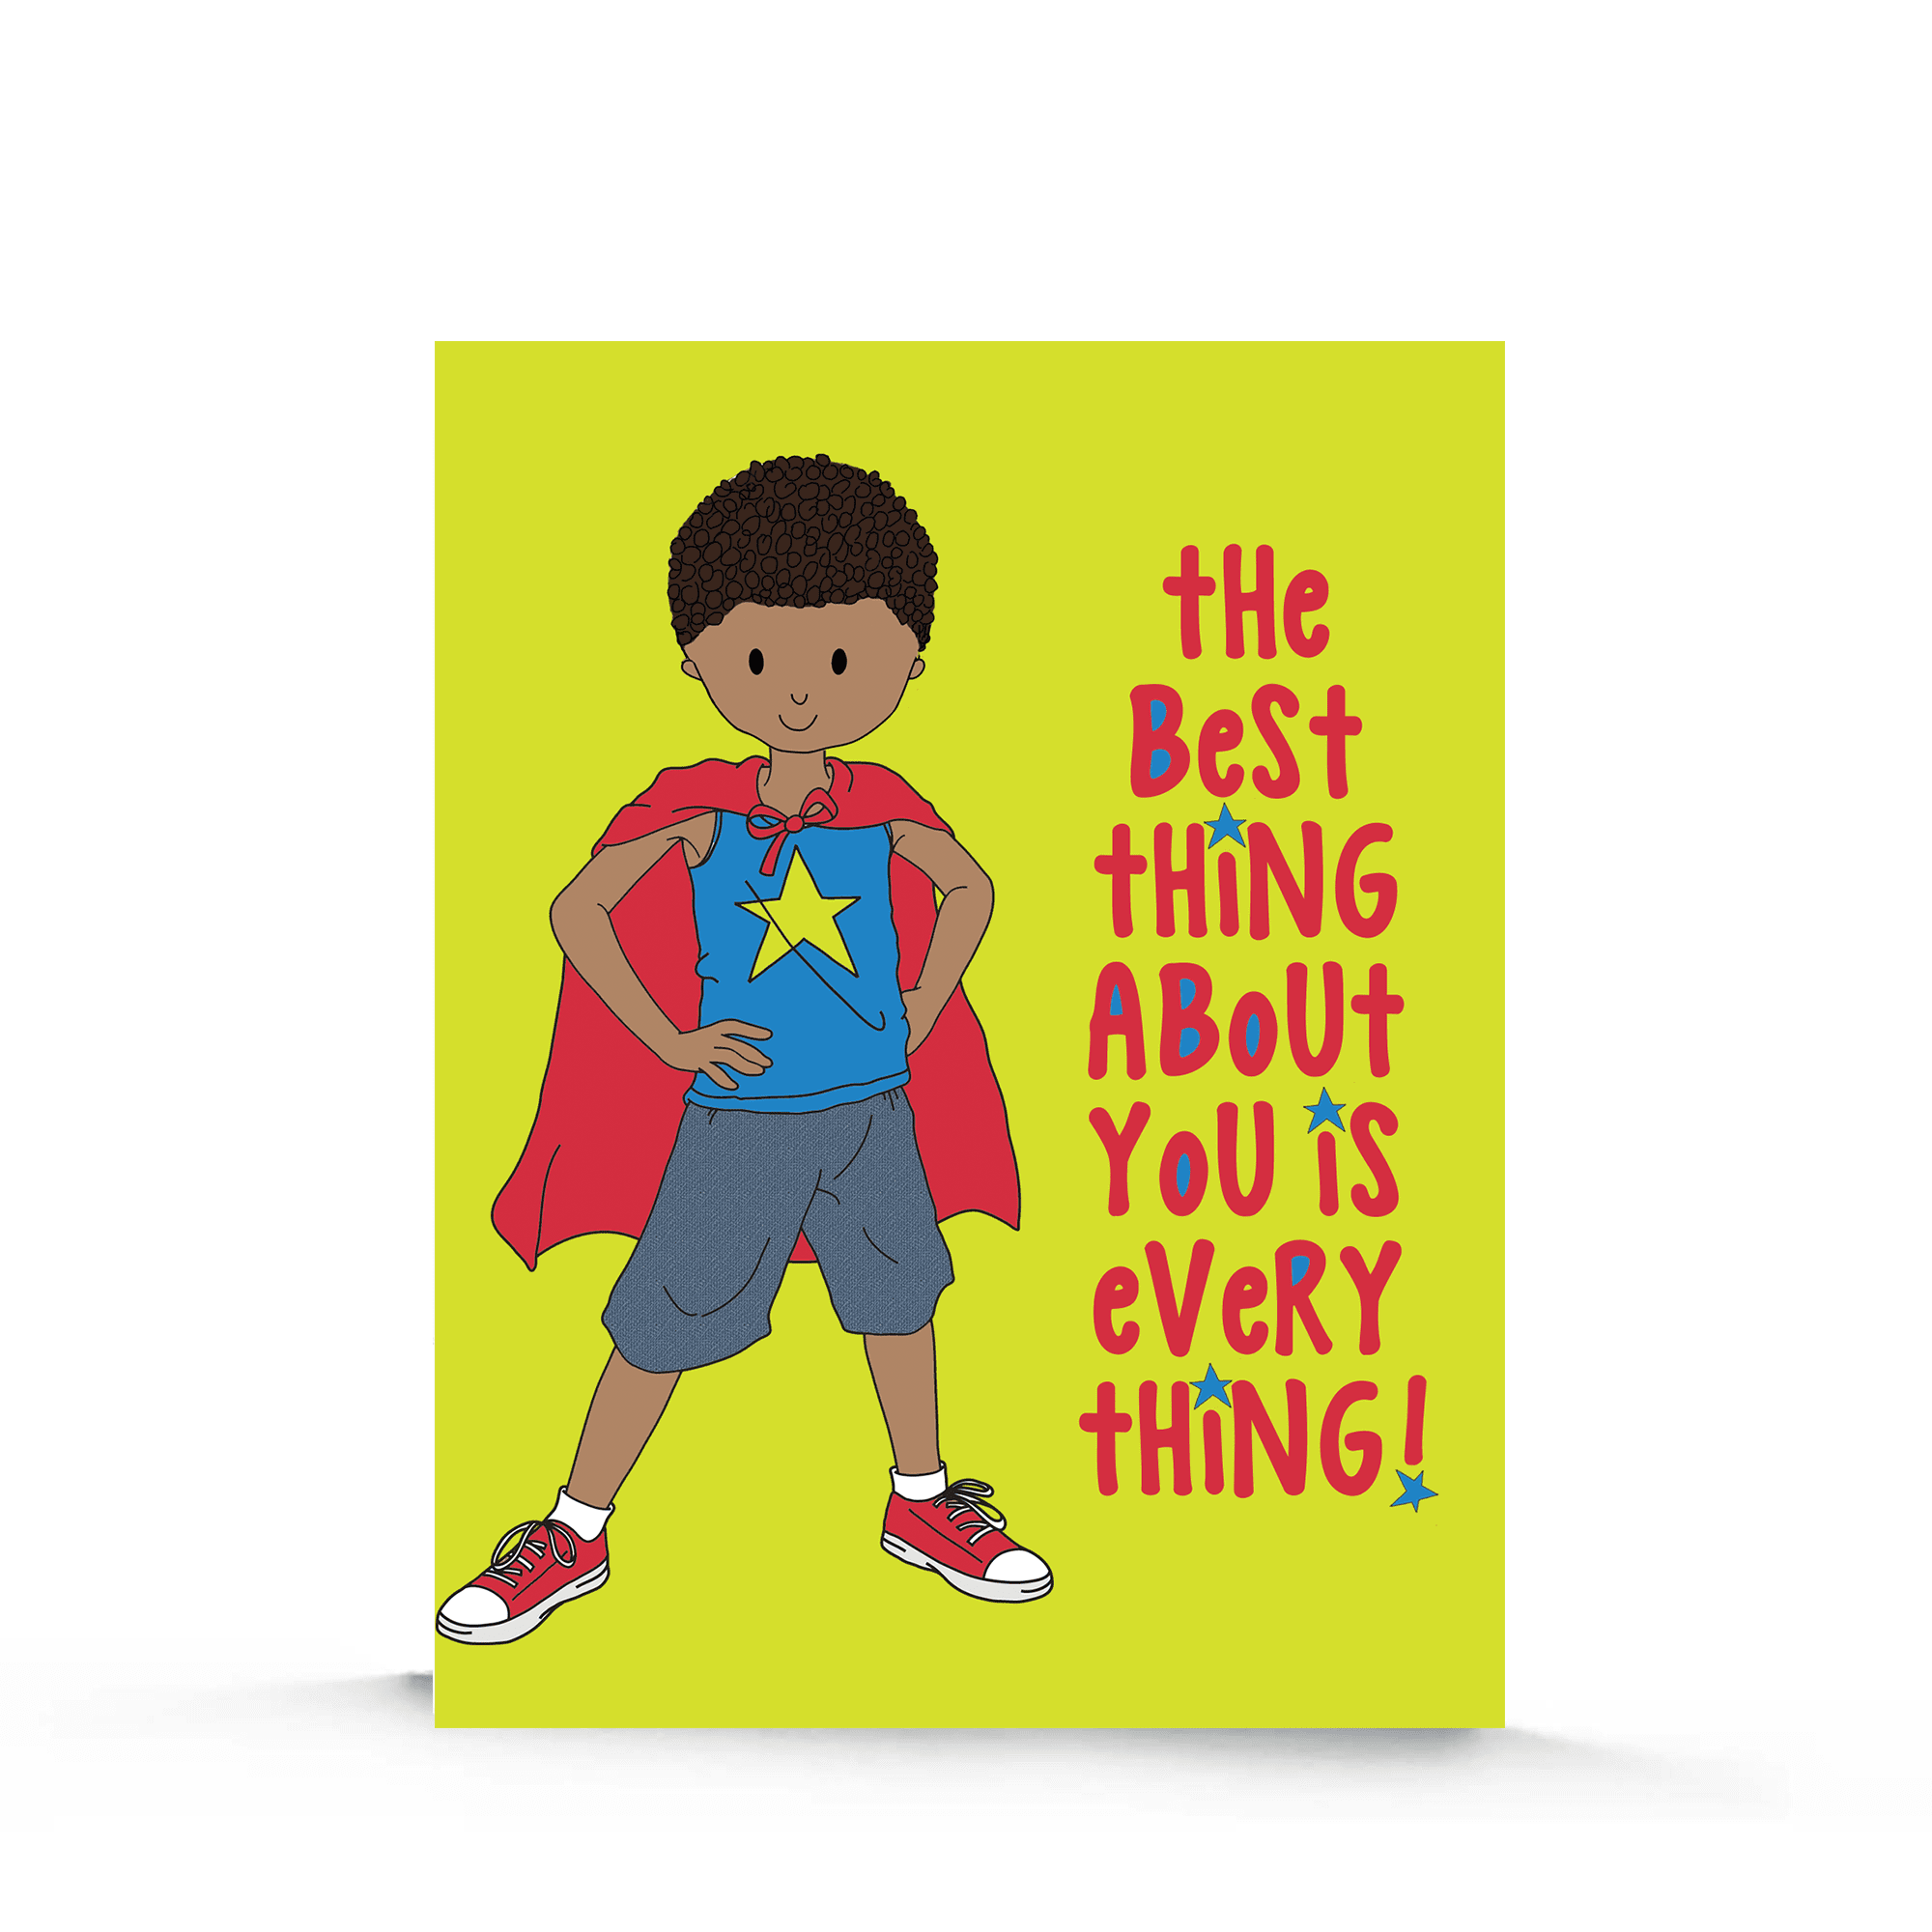 This Super Boy Birthday Card | Birthday Cards for Boys is made with love by Stacey M Design! Shop more unique gift ideas today with Spots Initiatives, the best way to support creators.